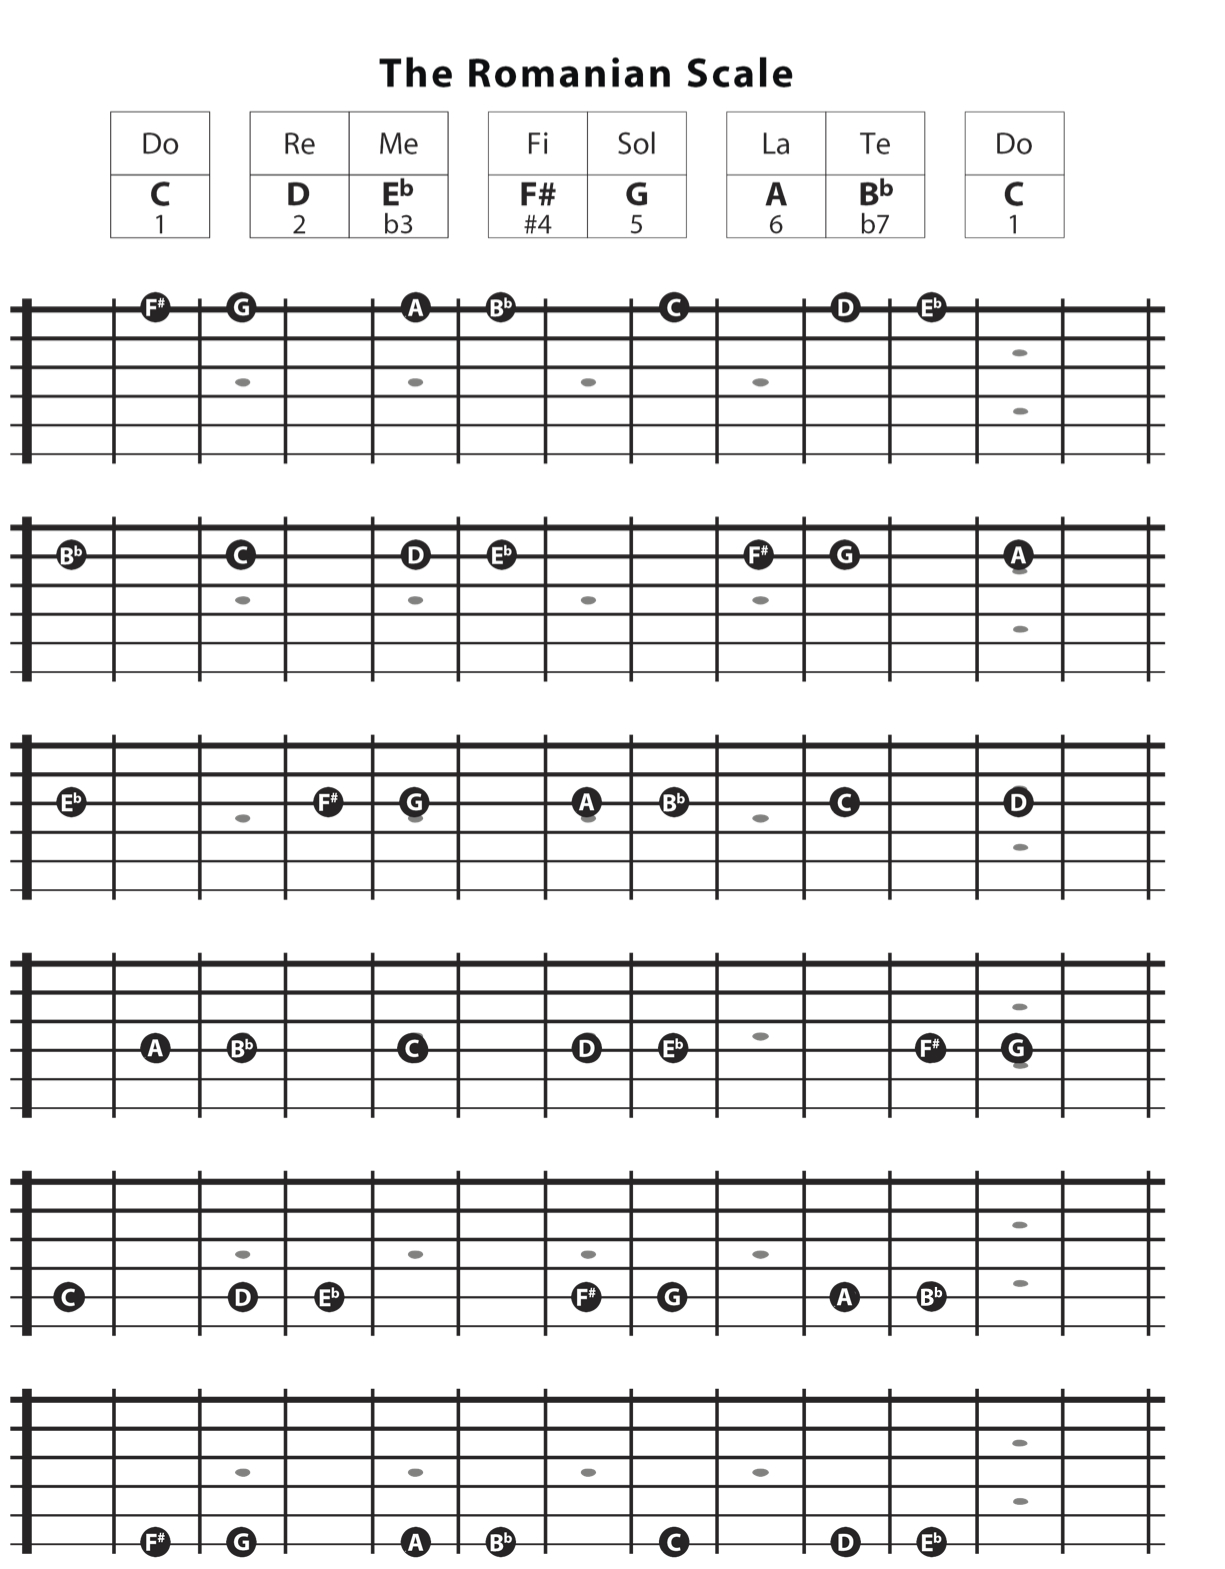 The Romanian Scale in the key of C linear on guitar